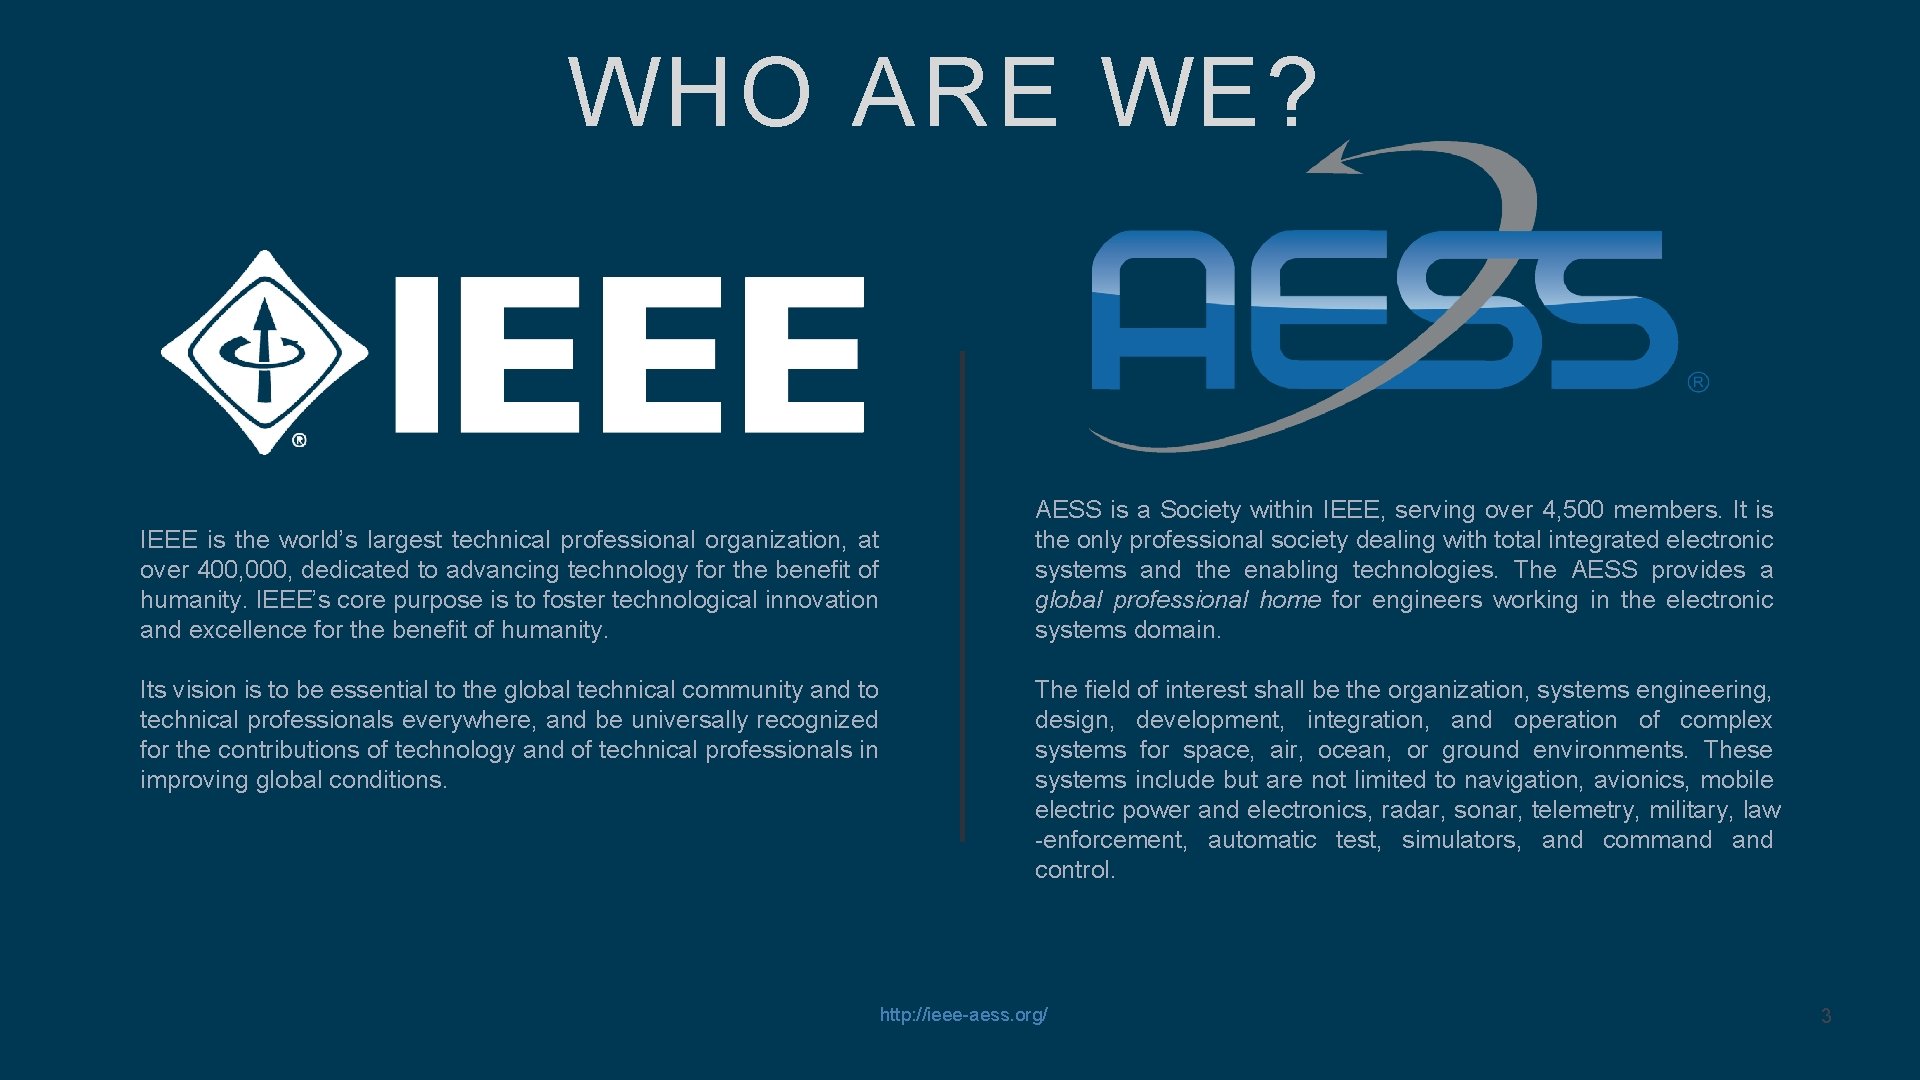 WHO ARE WE? IEEE is the world’s largest technical professional organization, at over 400,